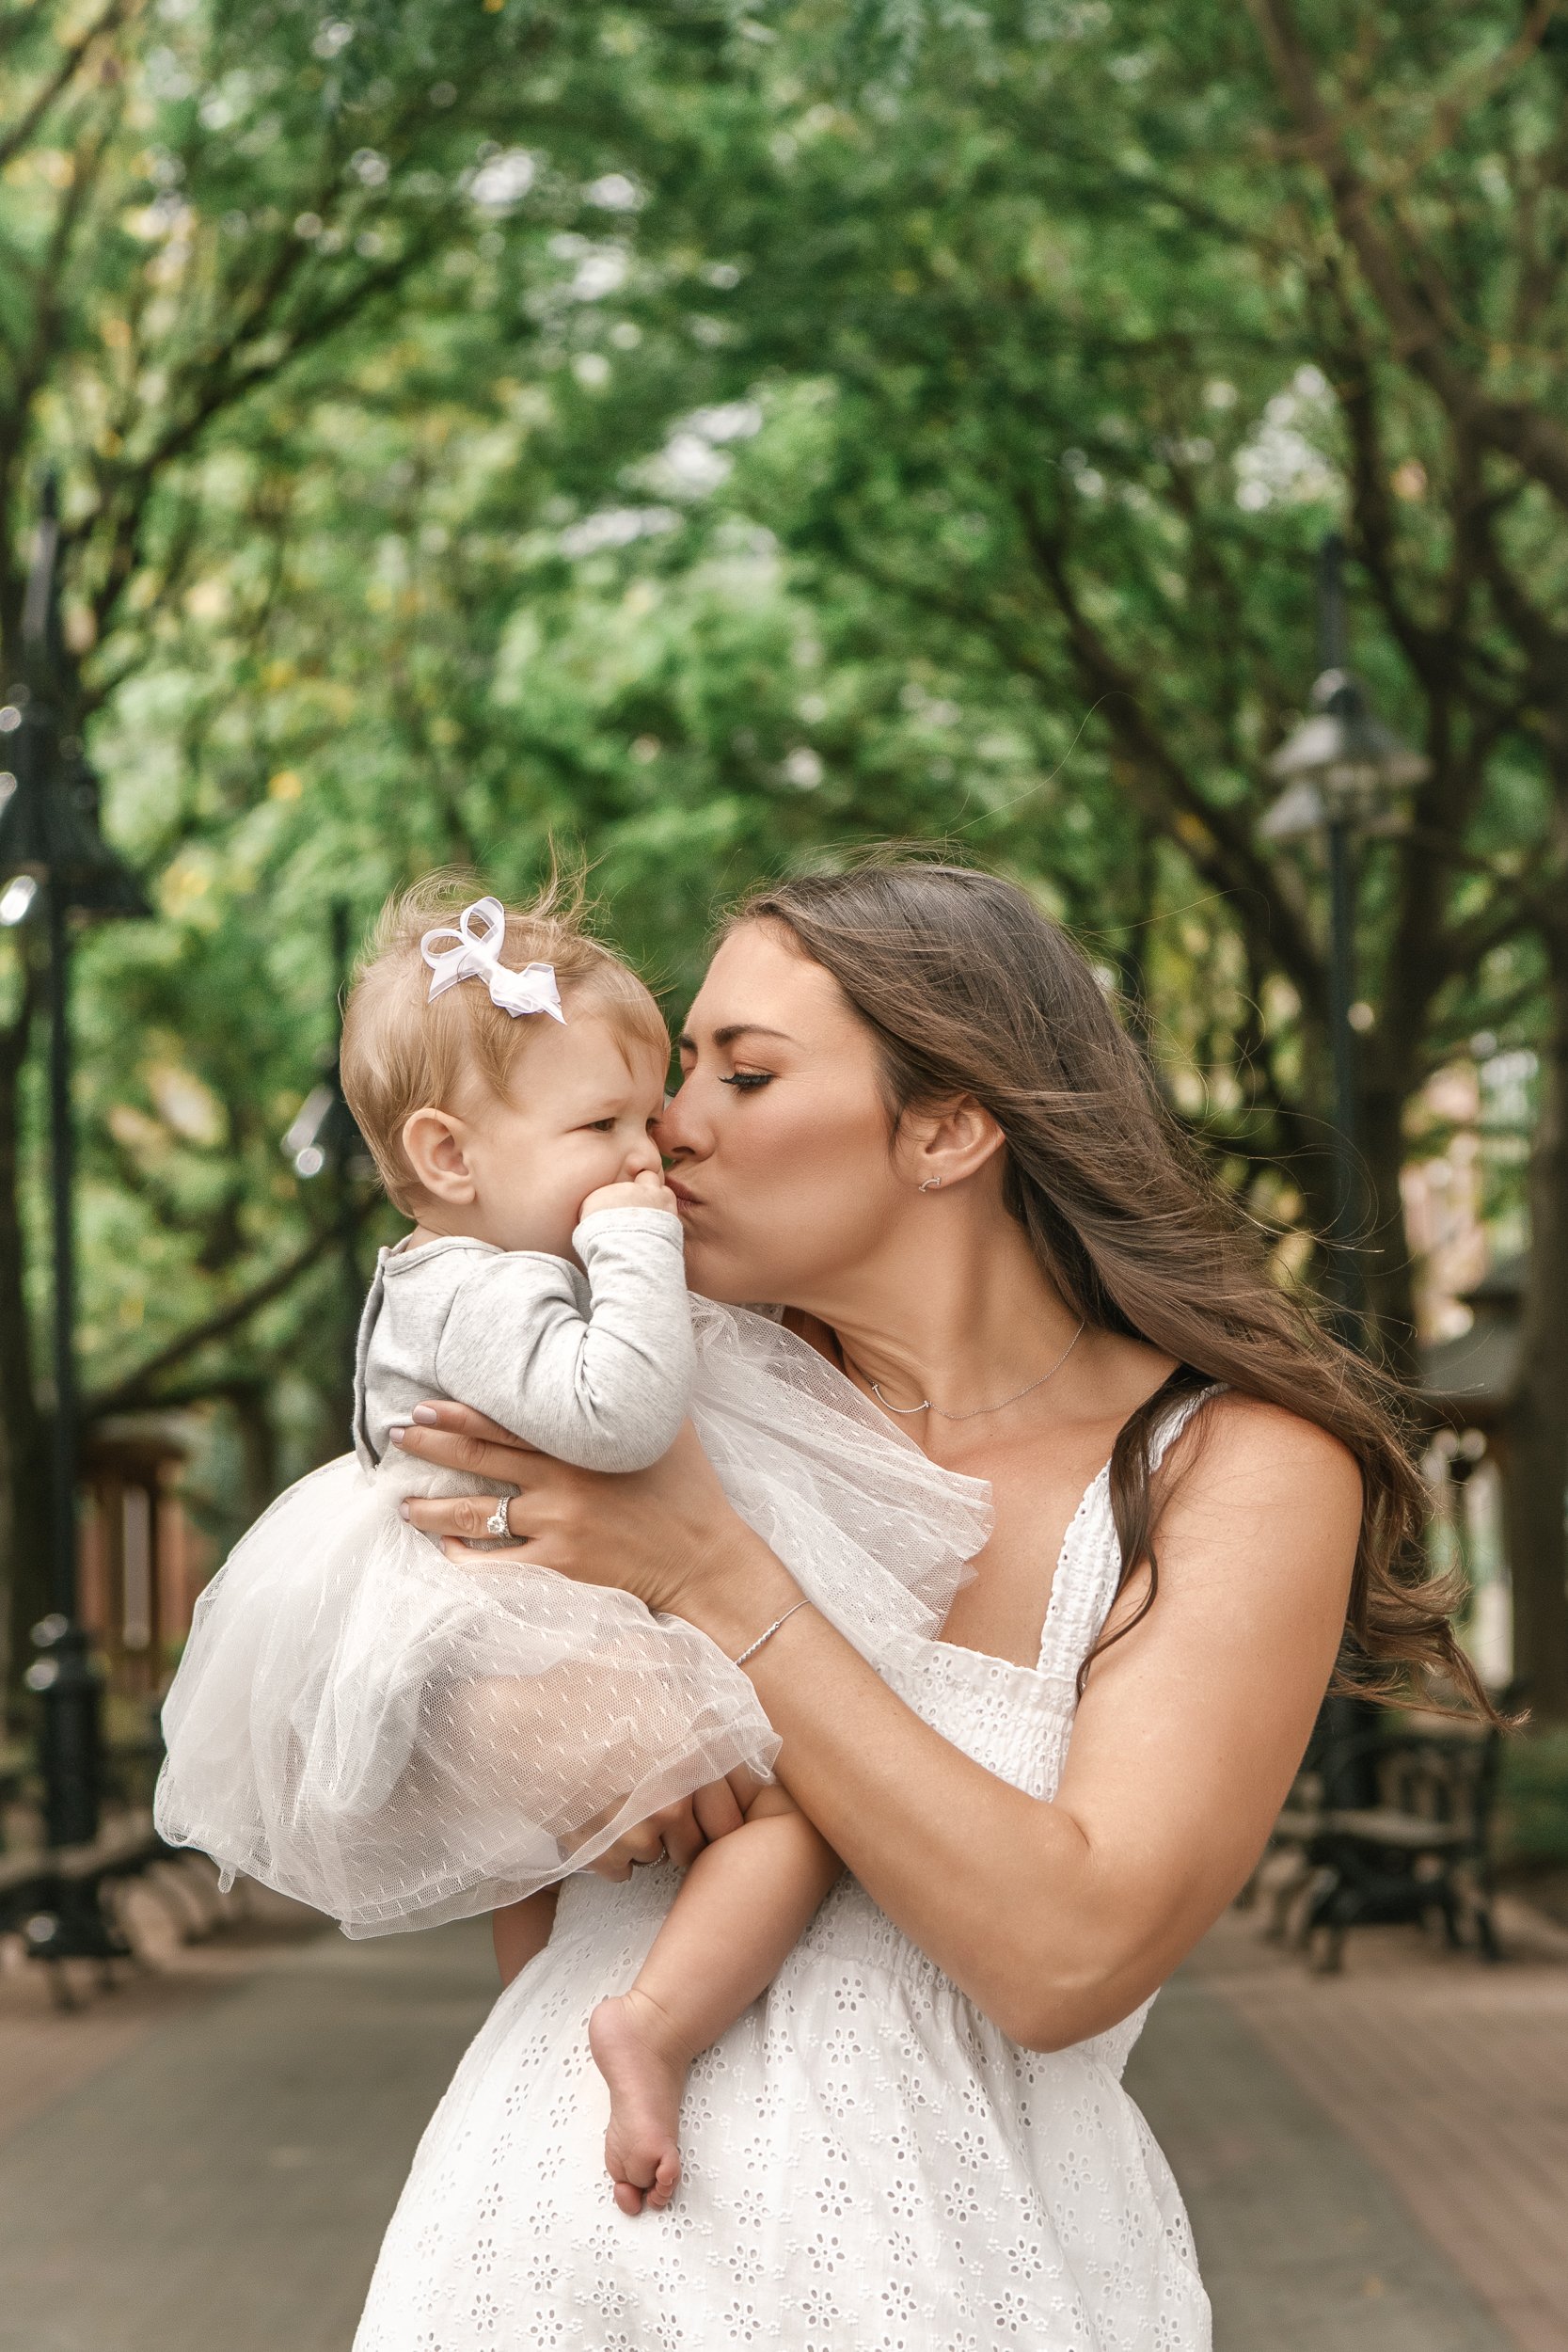  A brunette mother wearing a white dress kisses her baby girl by Nicole Hawkins Photography. mommy's little girl mother and daughter photos #nicolehawkinsphotography #newjerseyphotographers #familyphotographer #6monthportraits #NJfamilyphotos 